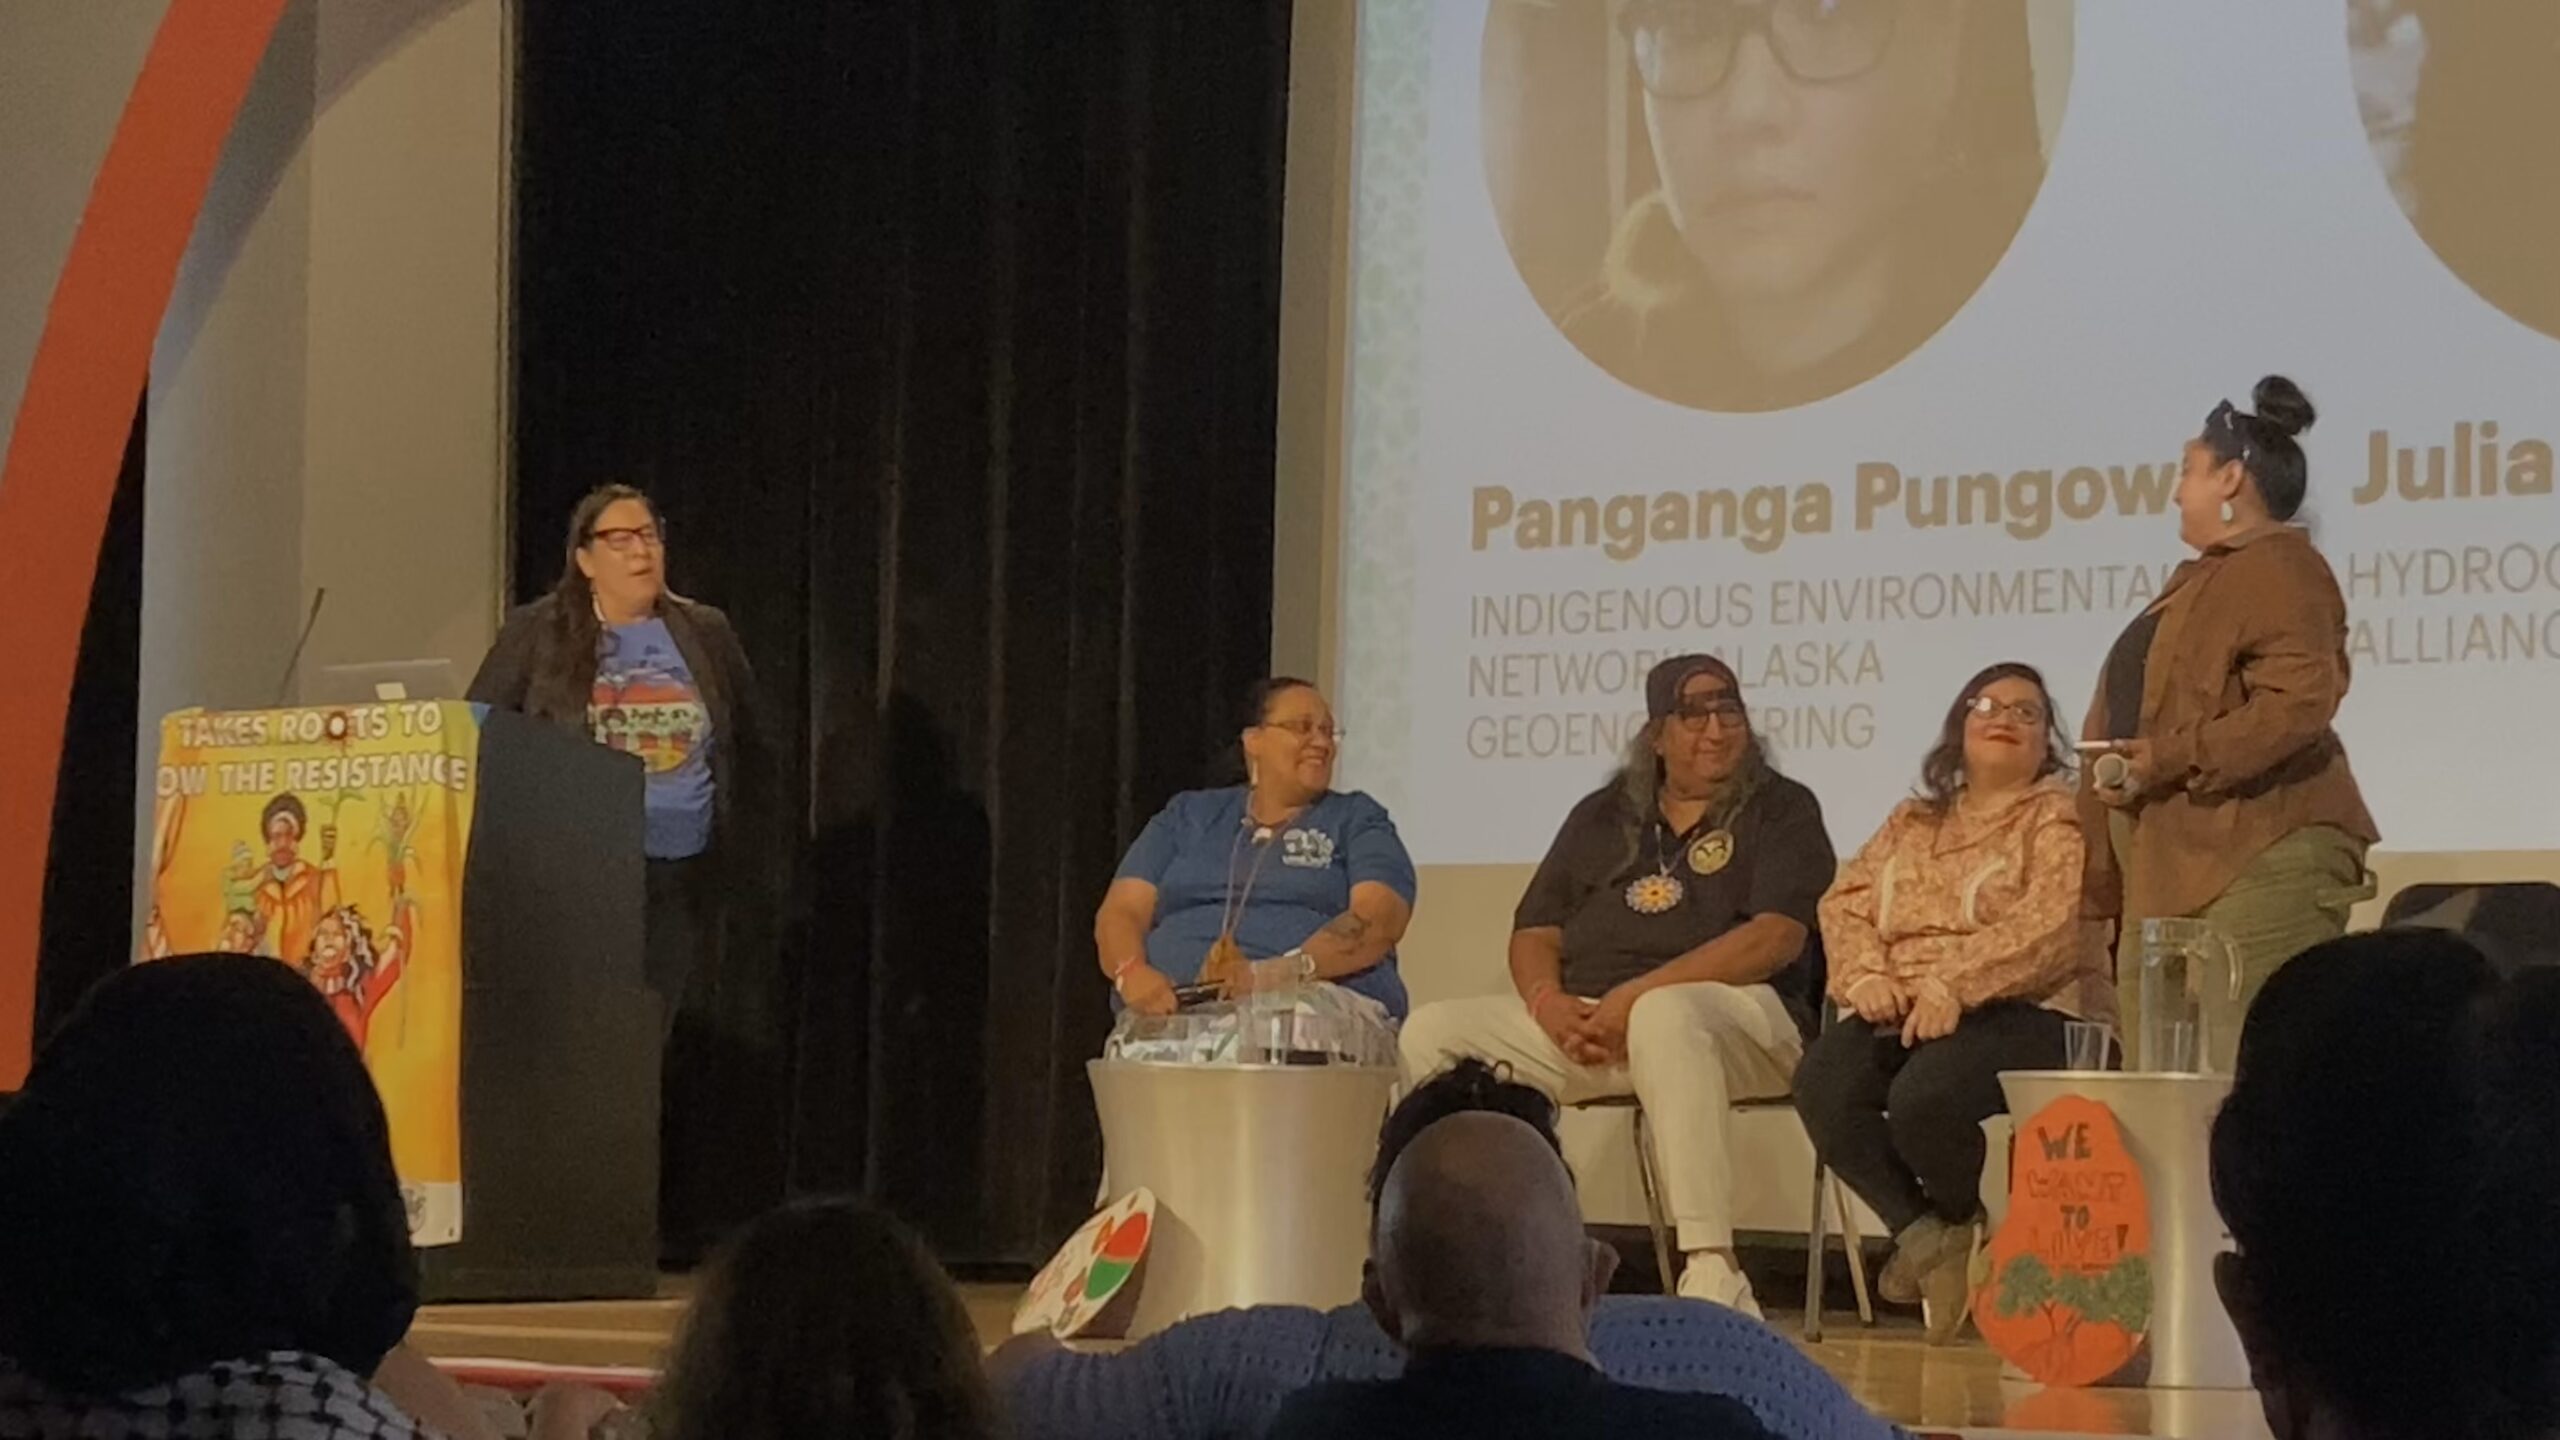 Photo of indigenous activists on stage introducing themselves.